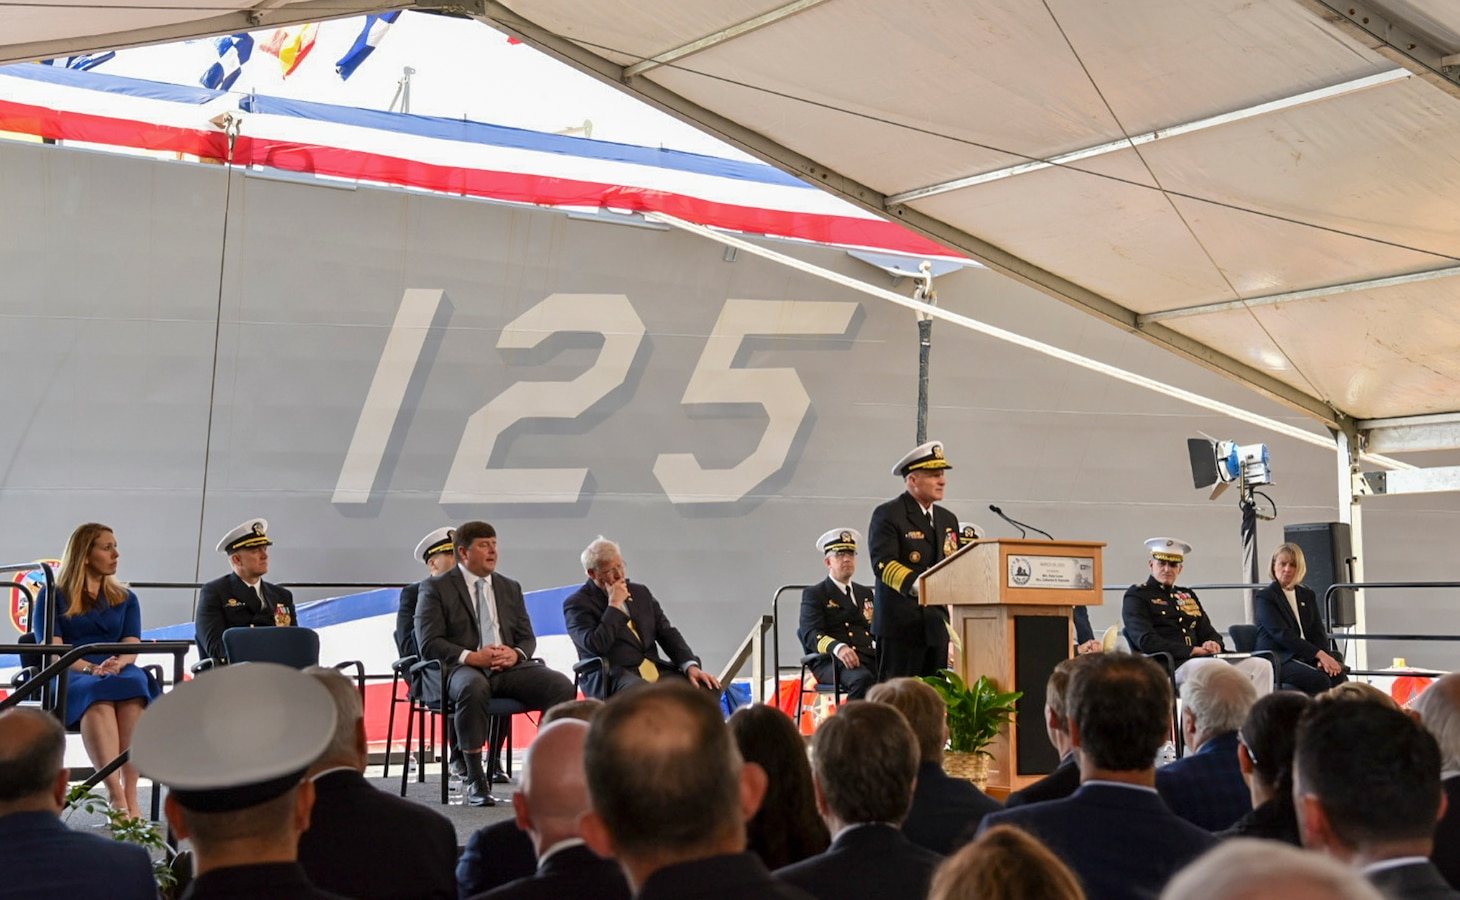 A man speaks from a podium on a stage in front of a Navy ship.